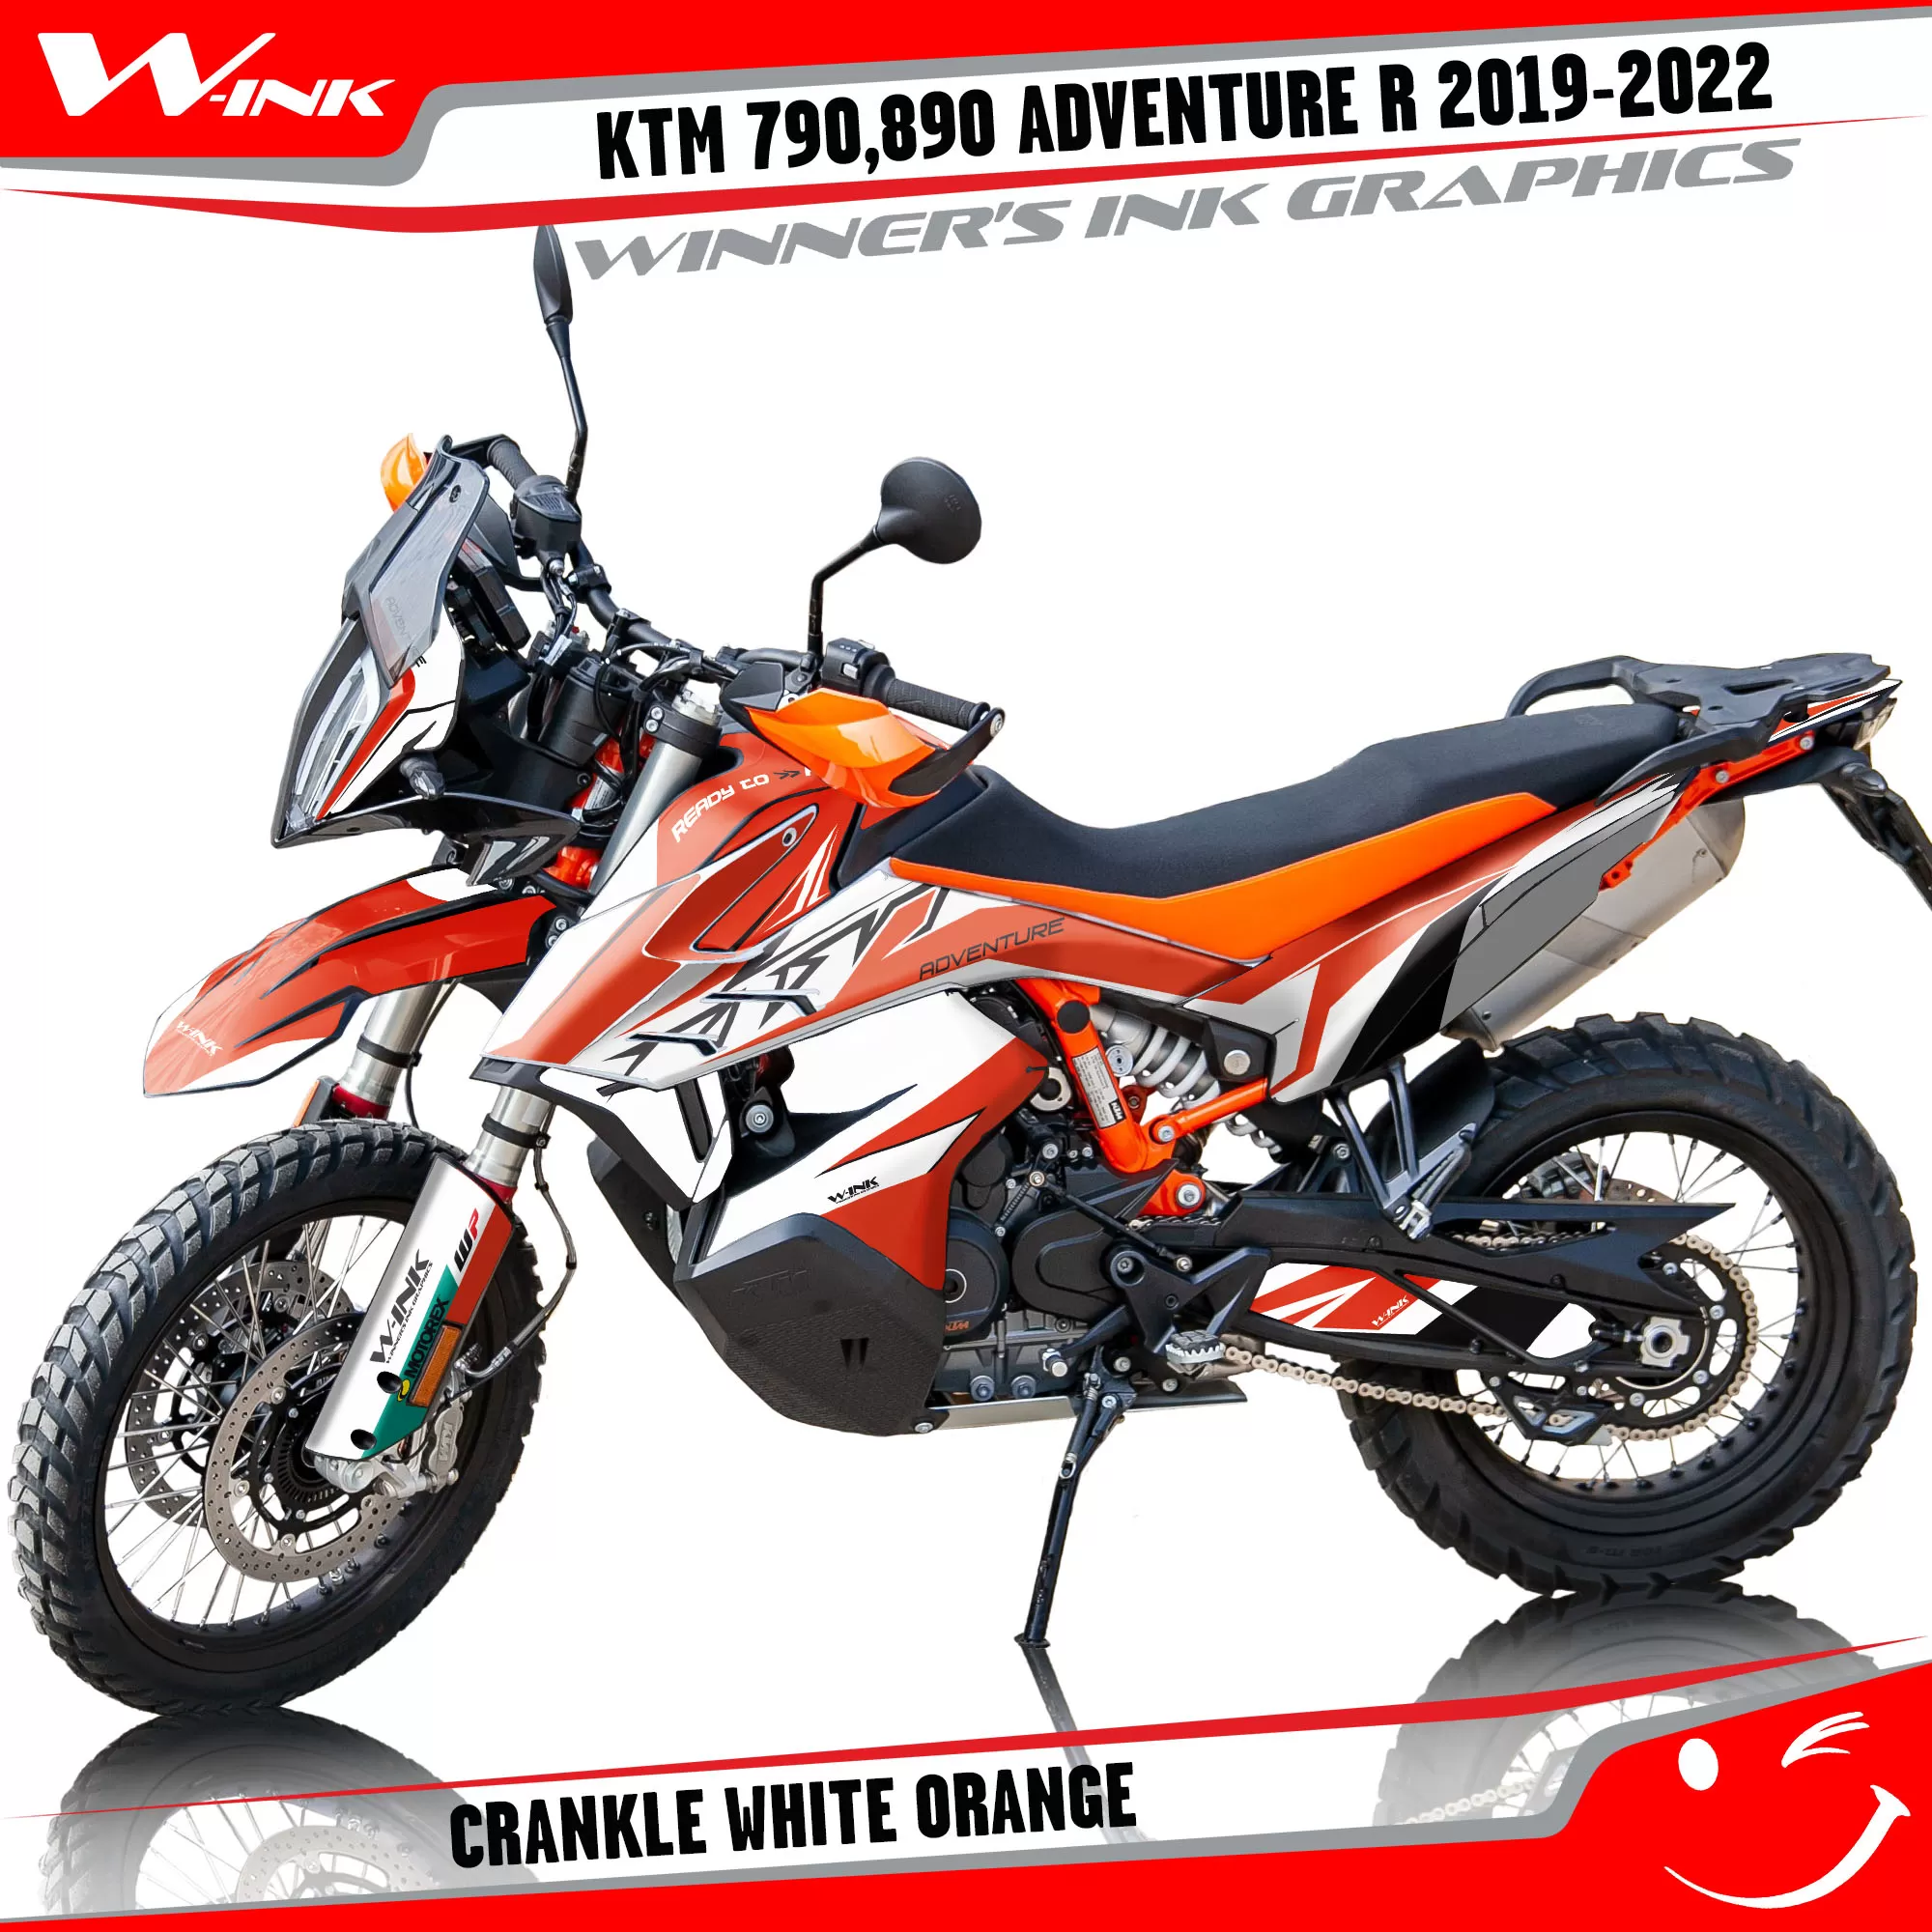 Adventure-R-790-890-2019-2020-2021-2022-graphics-kit-and-decals-with-designs-Crankle-White-Orange